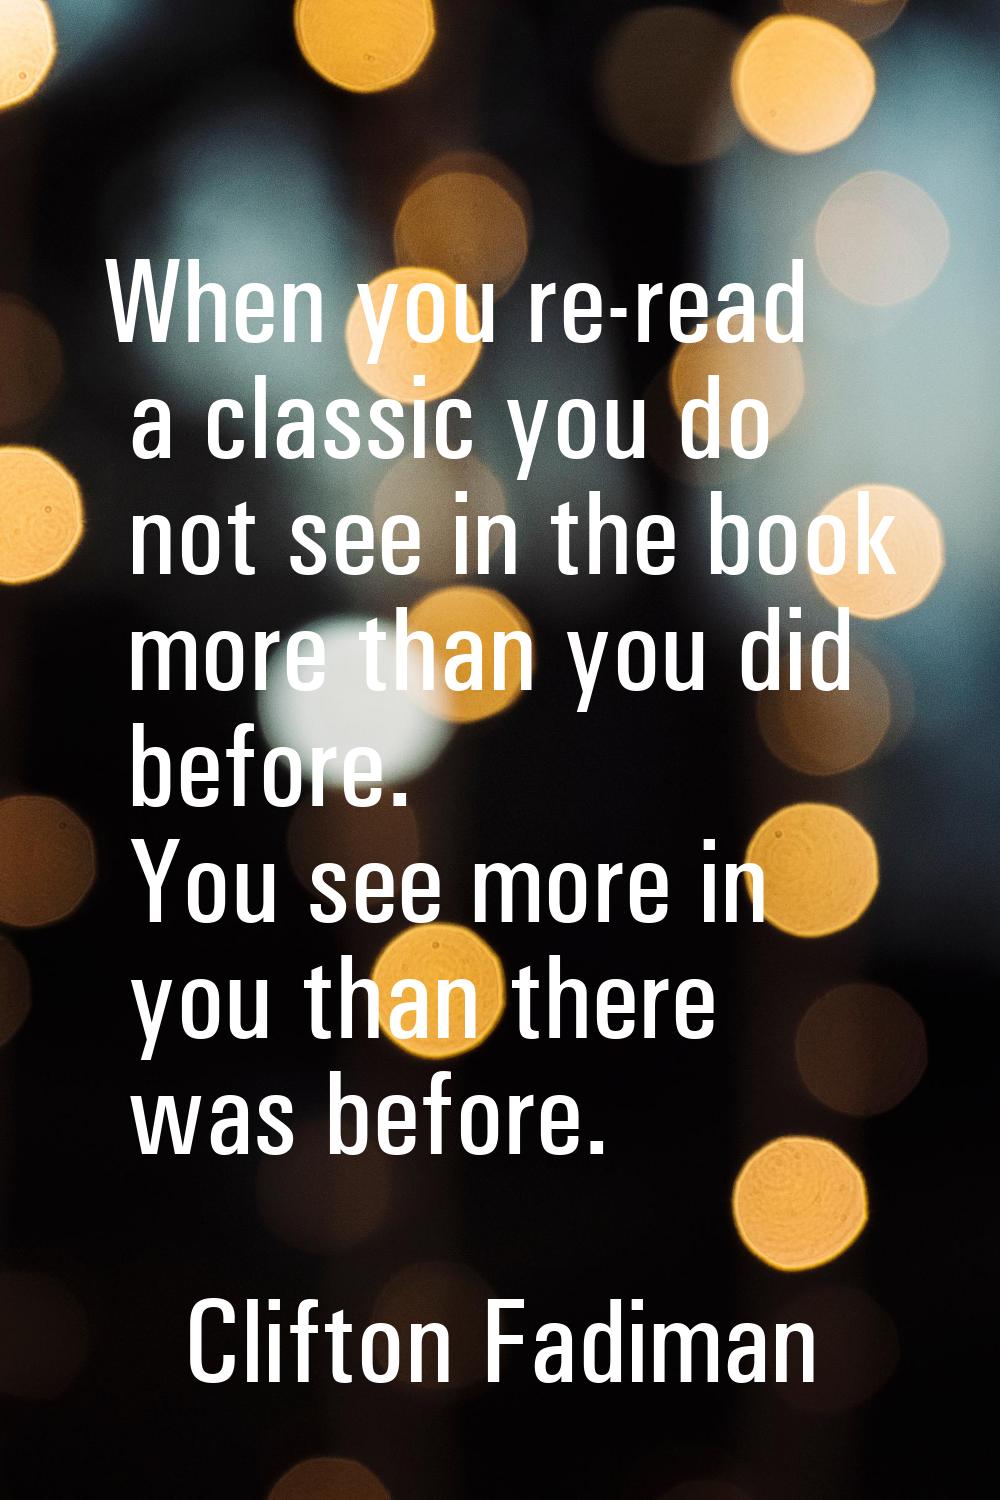 When you re-read a classic you do not see in the book more than you did before. You see more in you